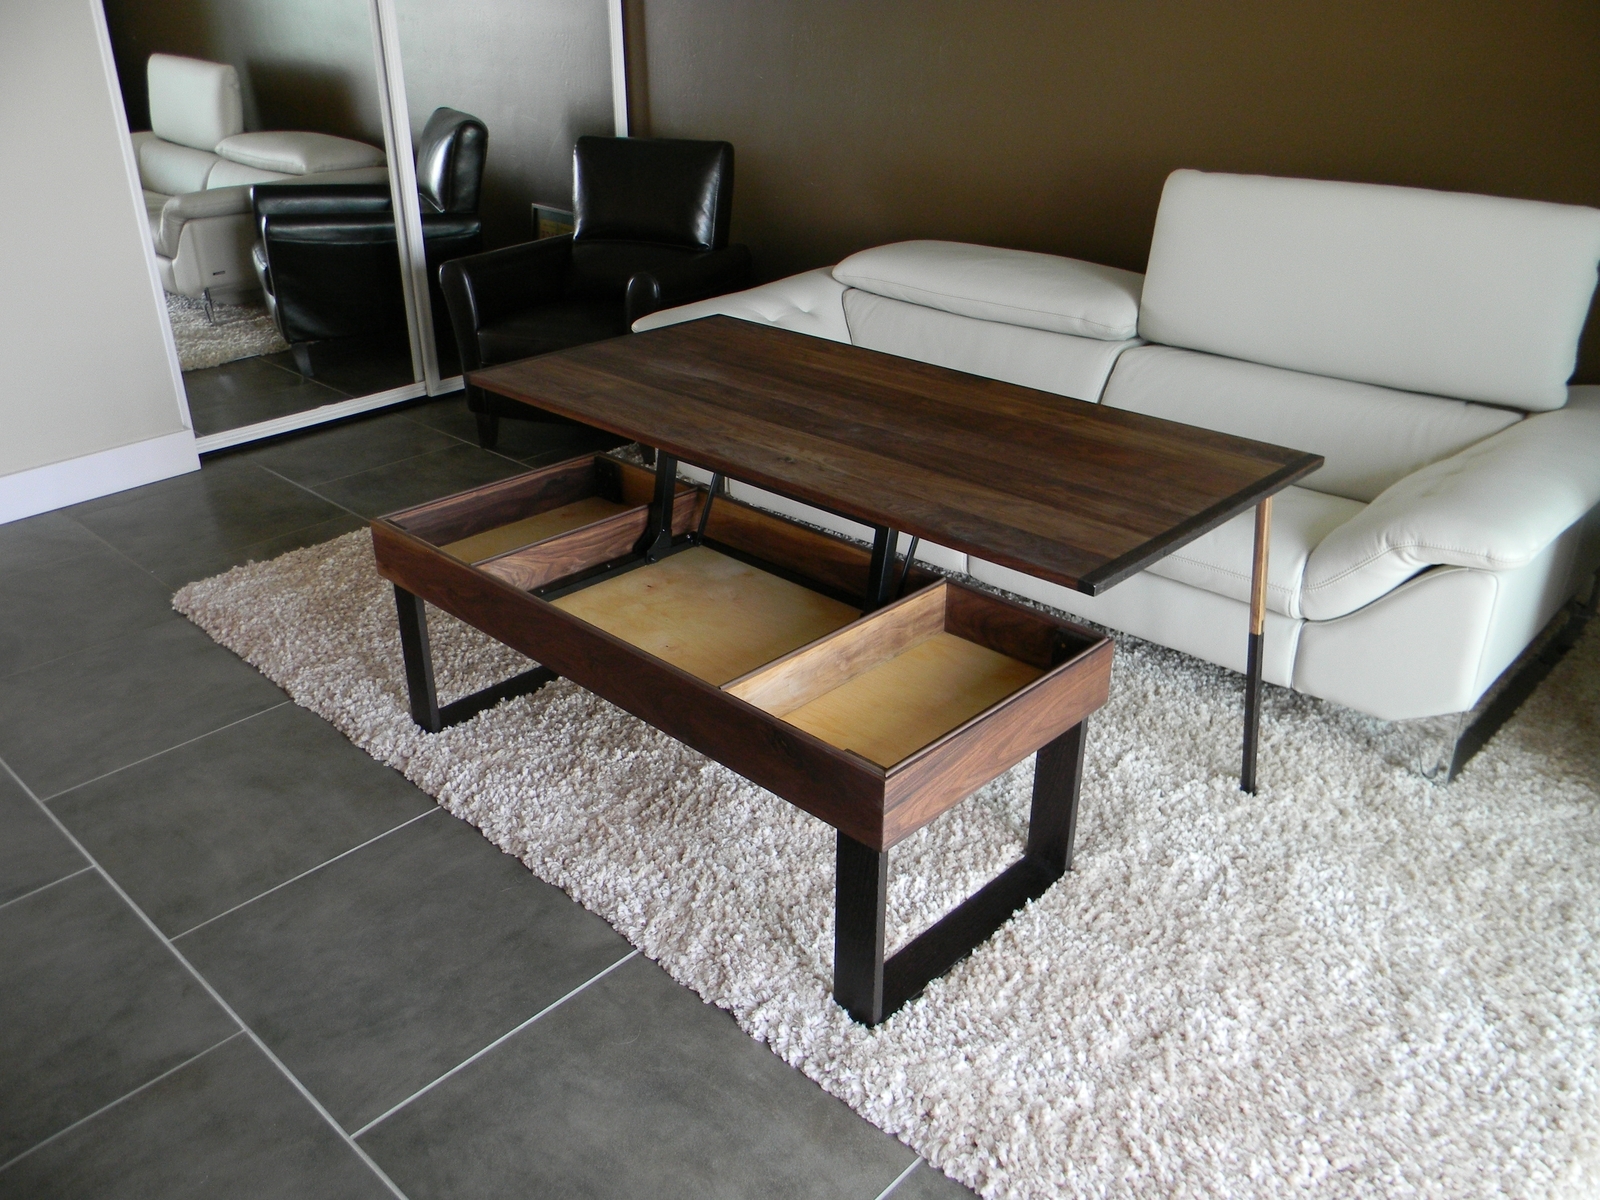 Living Room Pop Up Table With Storage